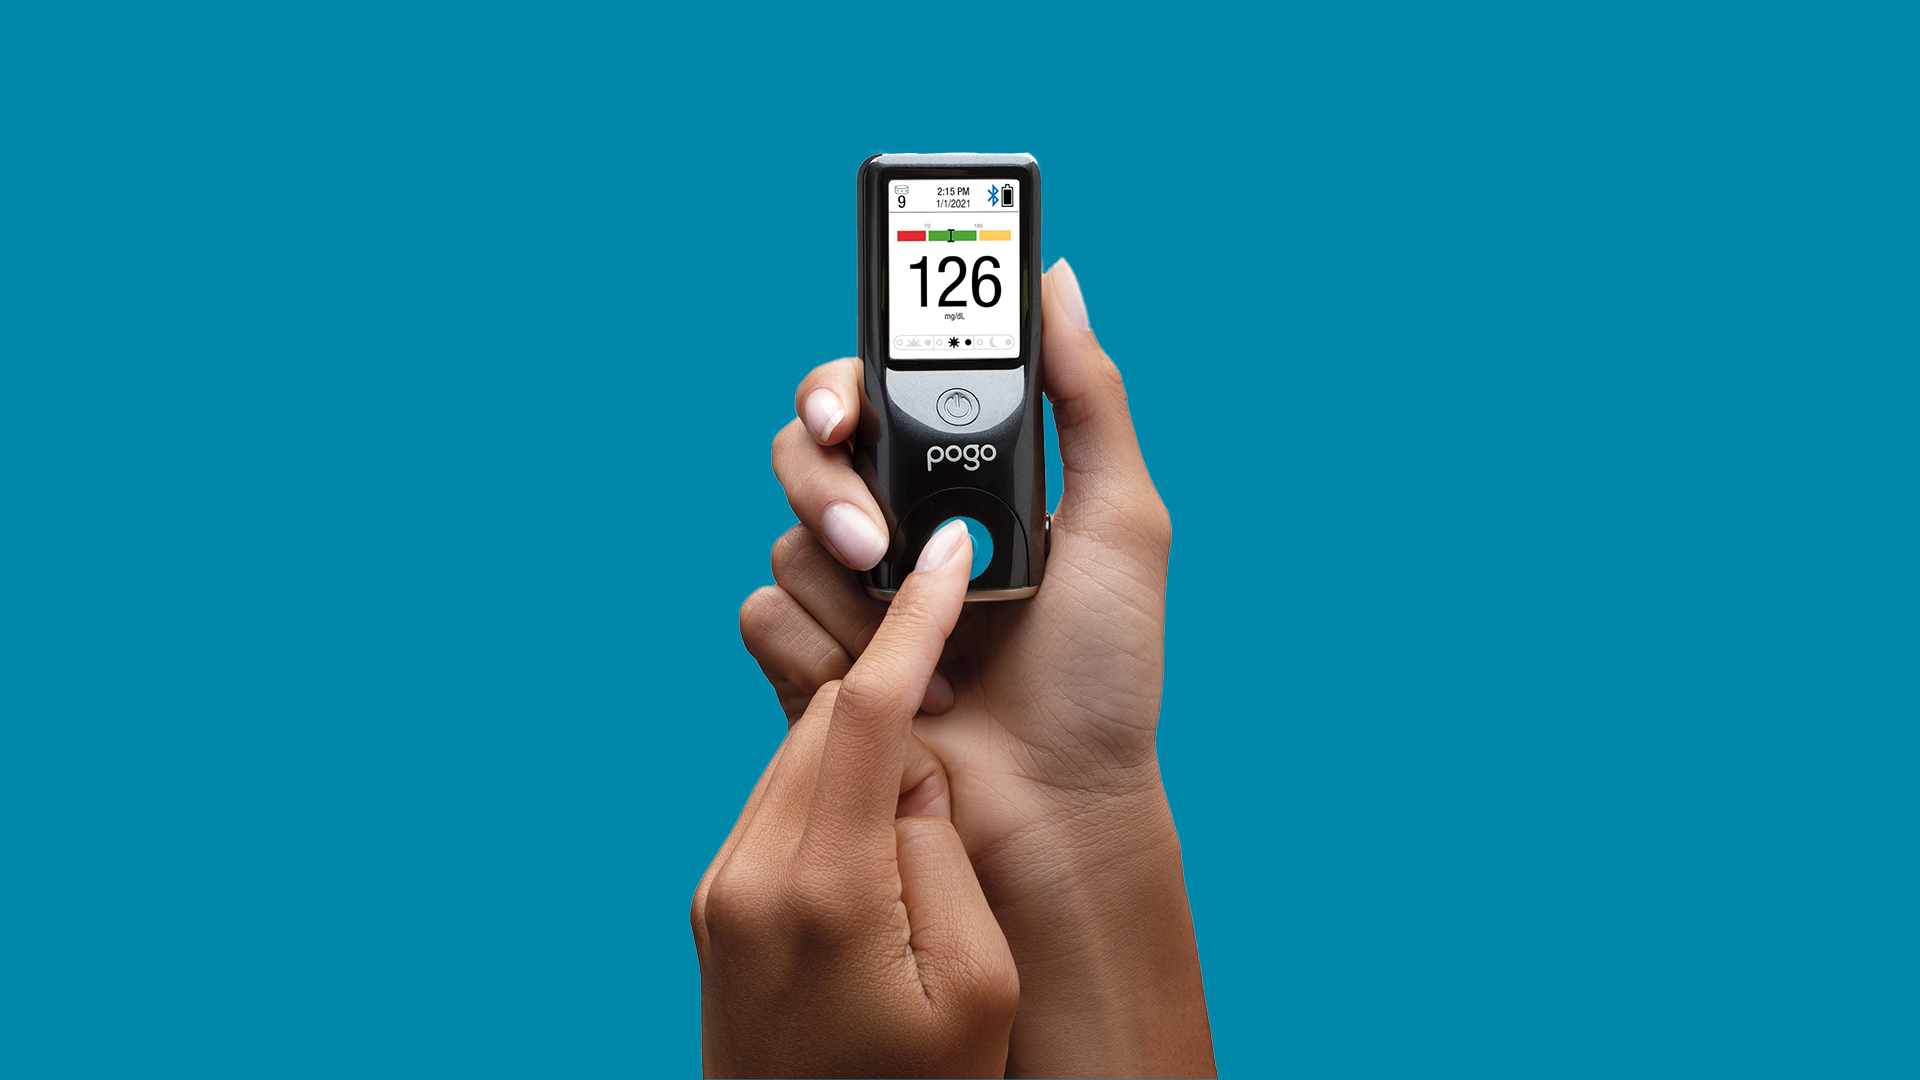 Leveraging our expertise as a top product design company, Speck Design revolutionizes diabetes care with the POGO Automatic® Blood Glucose Monitoring System